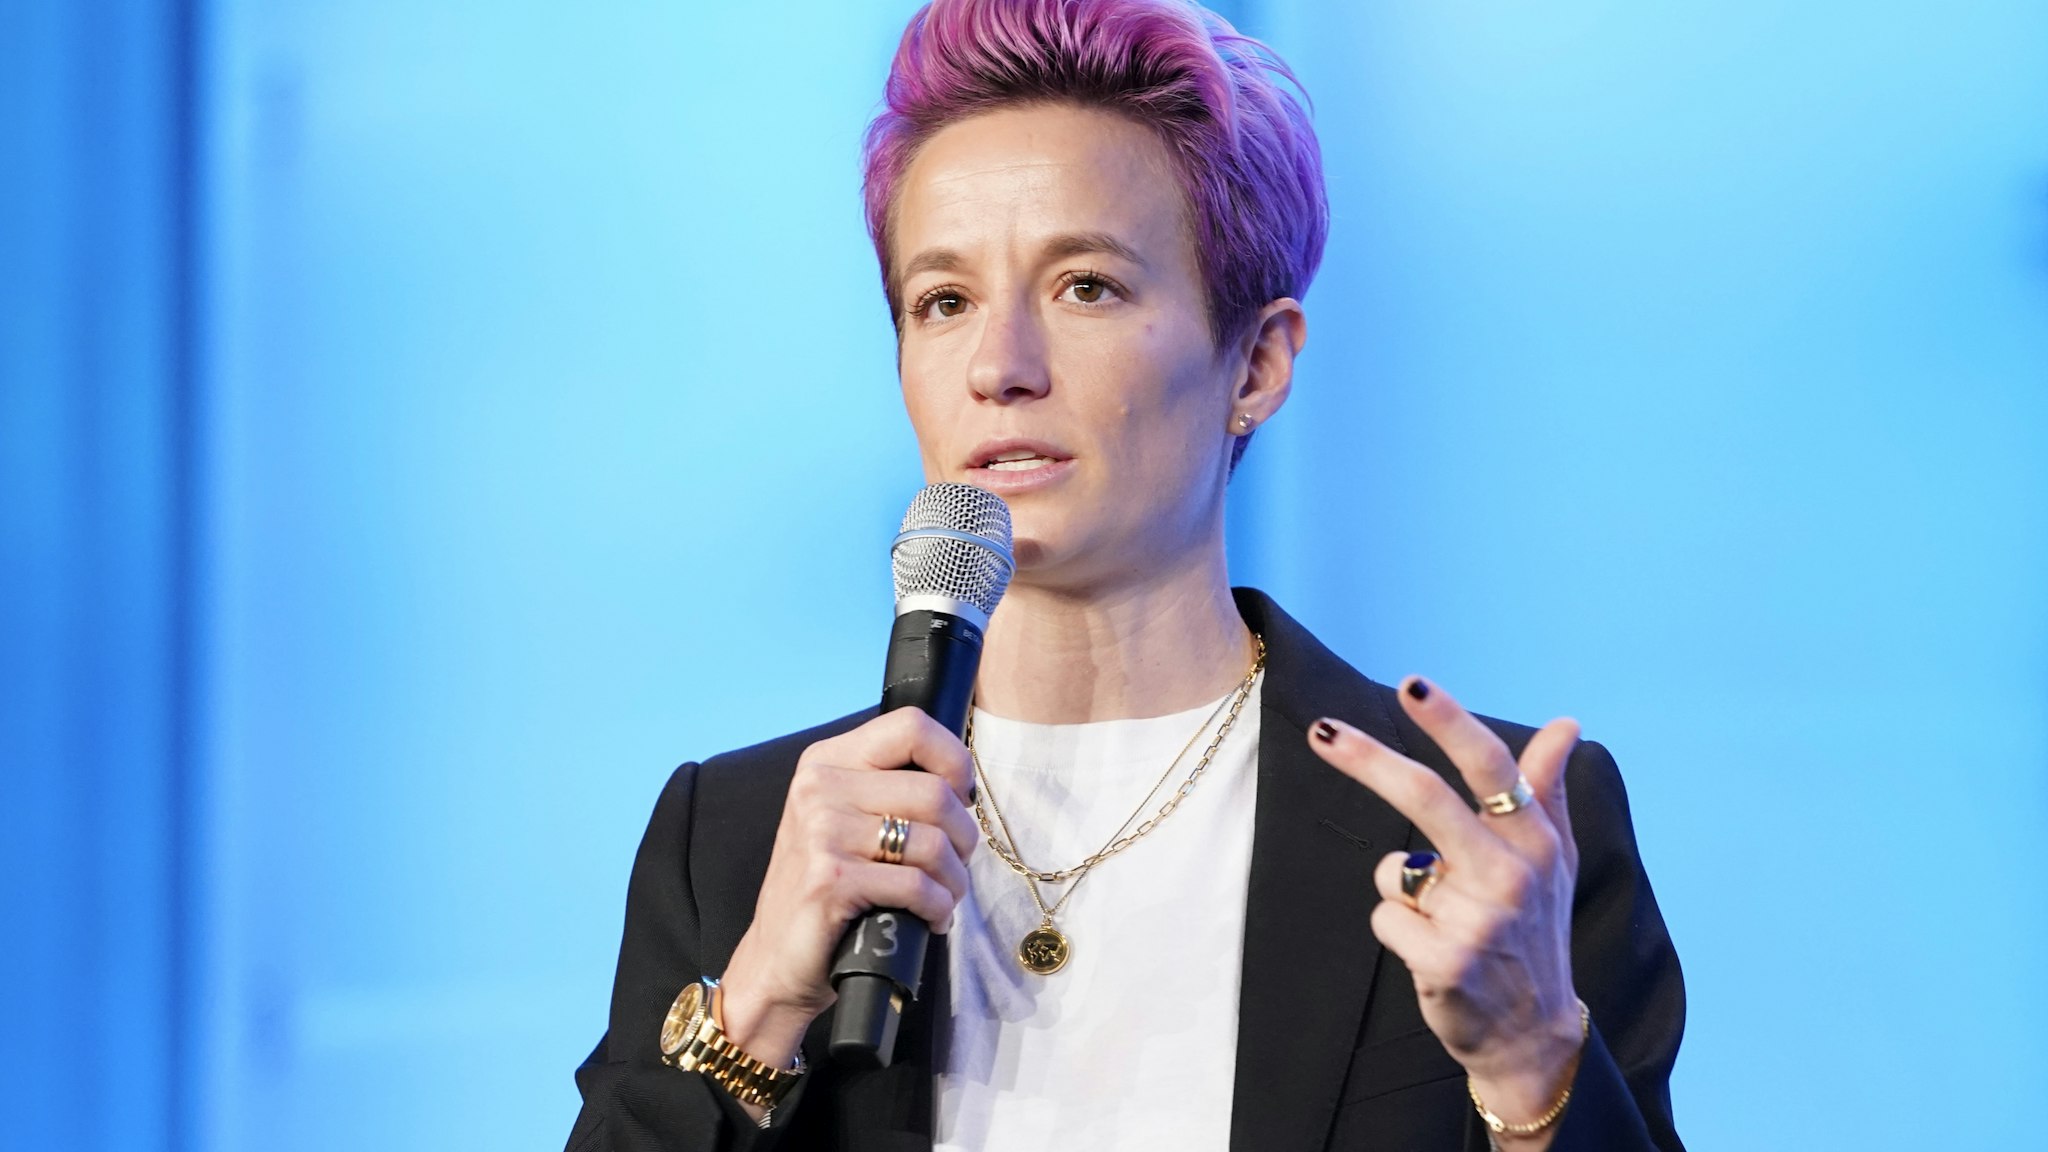 AUSTIN, TEXAS - OCTOBER 24: Two-time World Cup Champion, and co-captain of the US Women’s National Team Megan Rapinoe speaks on stage during Texas Conference For Women 2019 at Austin Convention Center on October 24, 2019 in Austin, Texas. (Photo by Marla Aufmuth/Getty Images for Texas Conference for Women 2019)